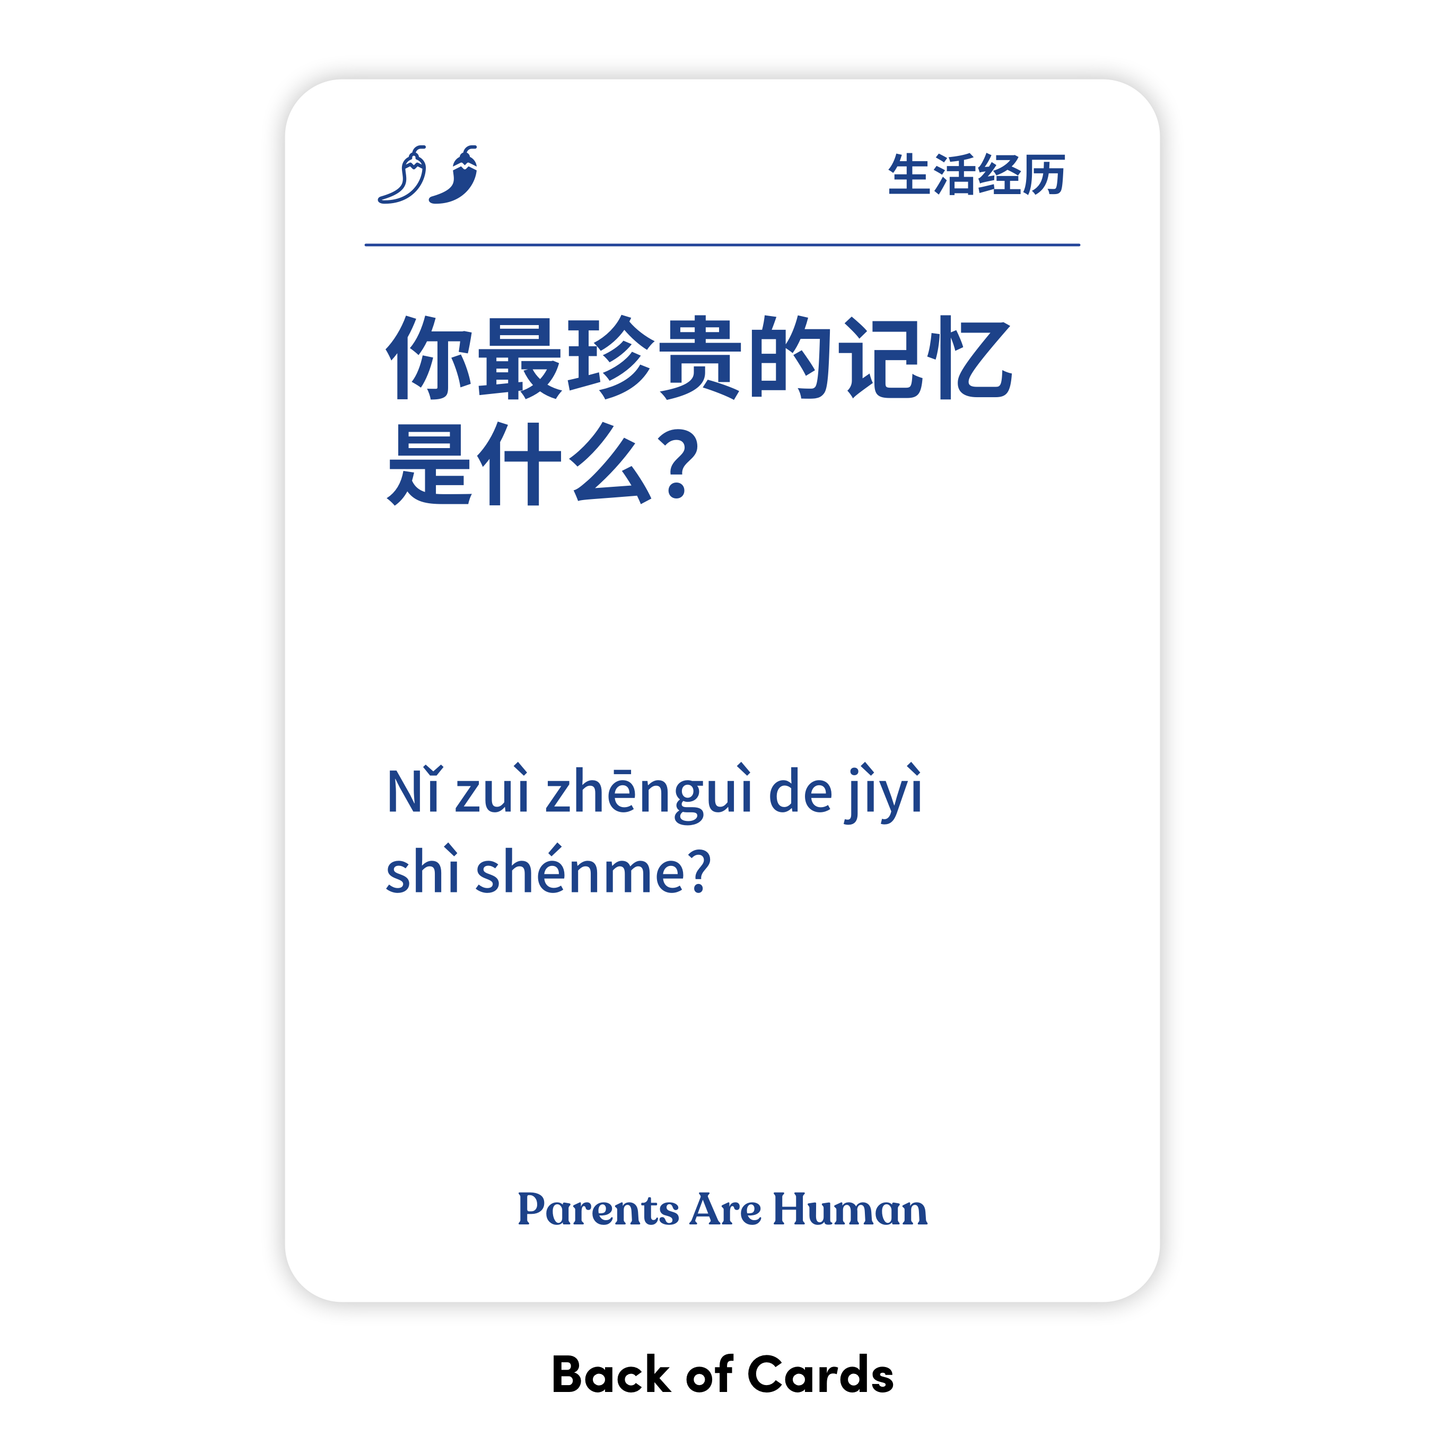 Parents Are Human (English + Simplified Chinese)